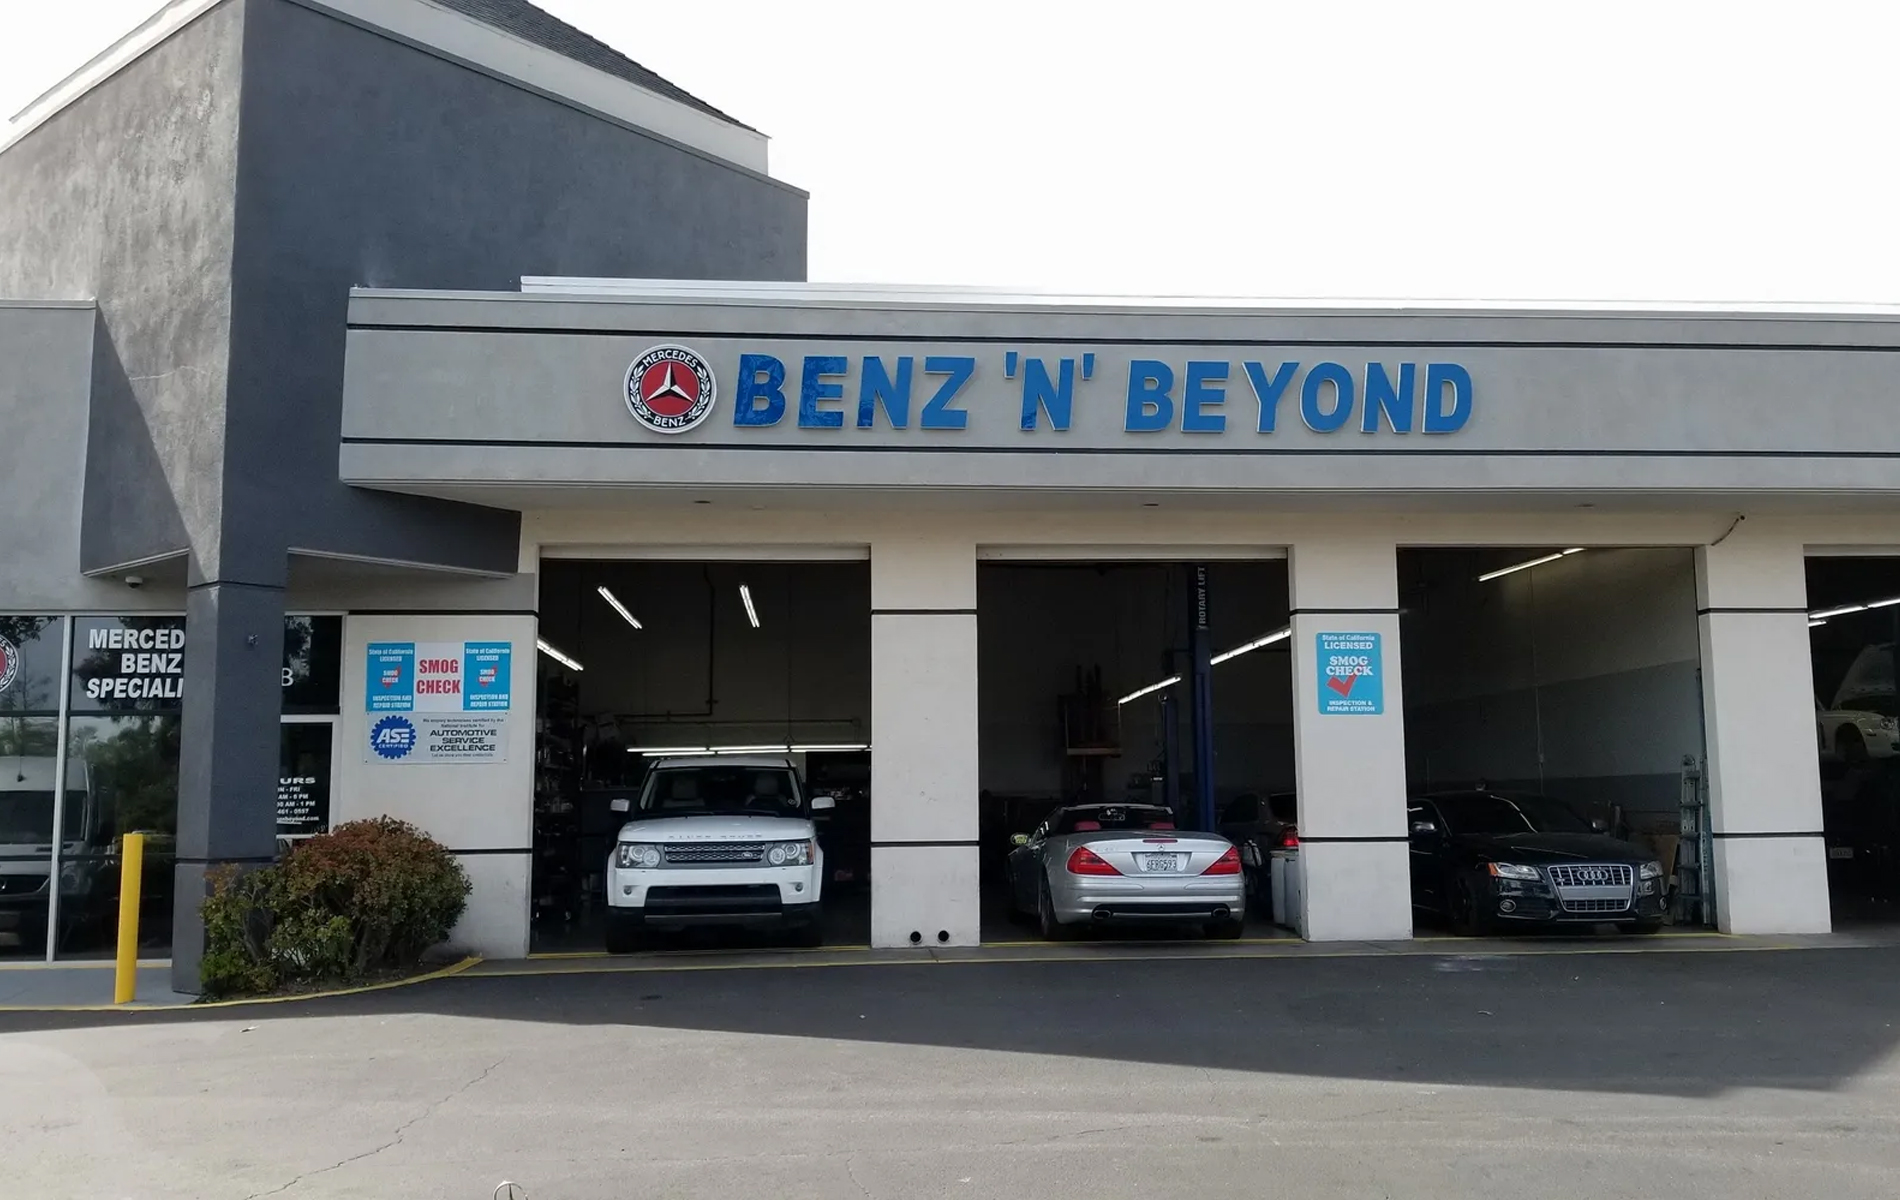 Benz N Beyond - High-Quality Automotive Maintenance and Repair Services - Internal Page Banner